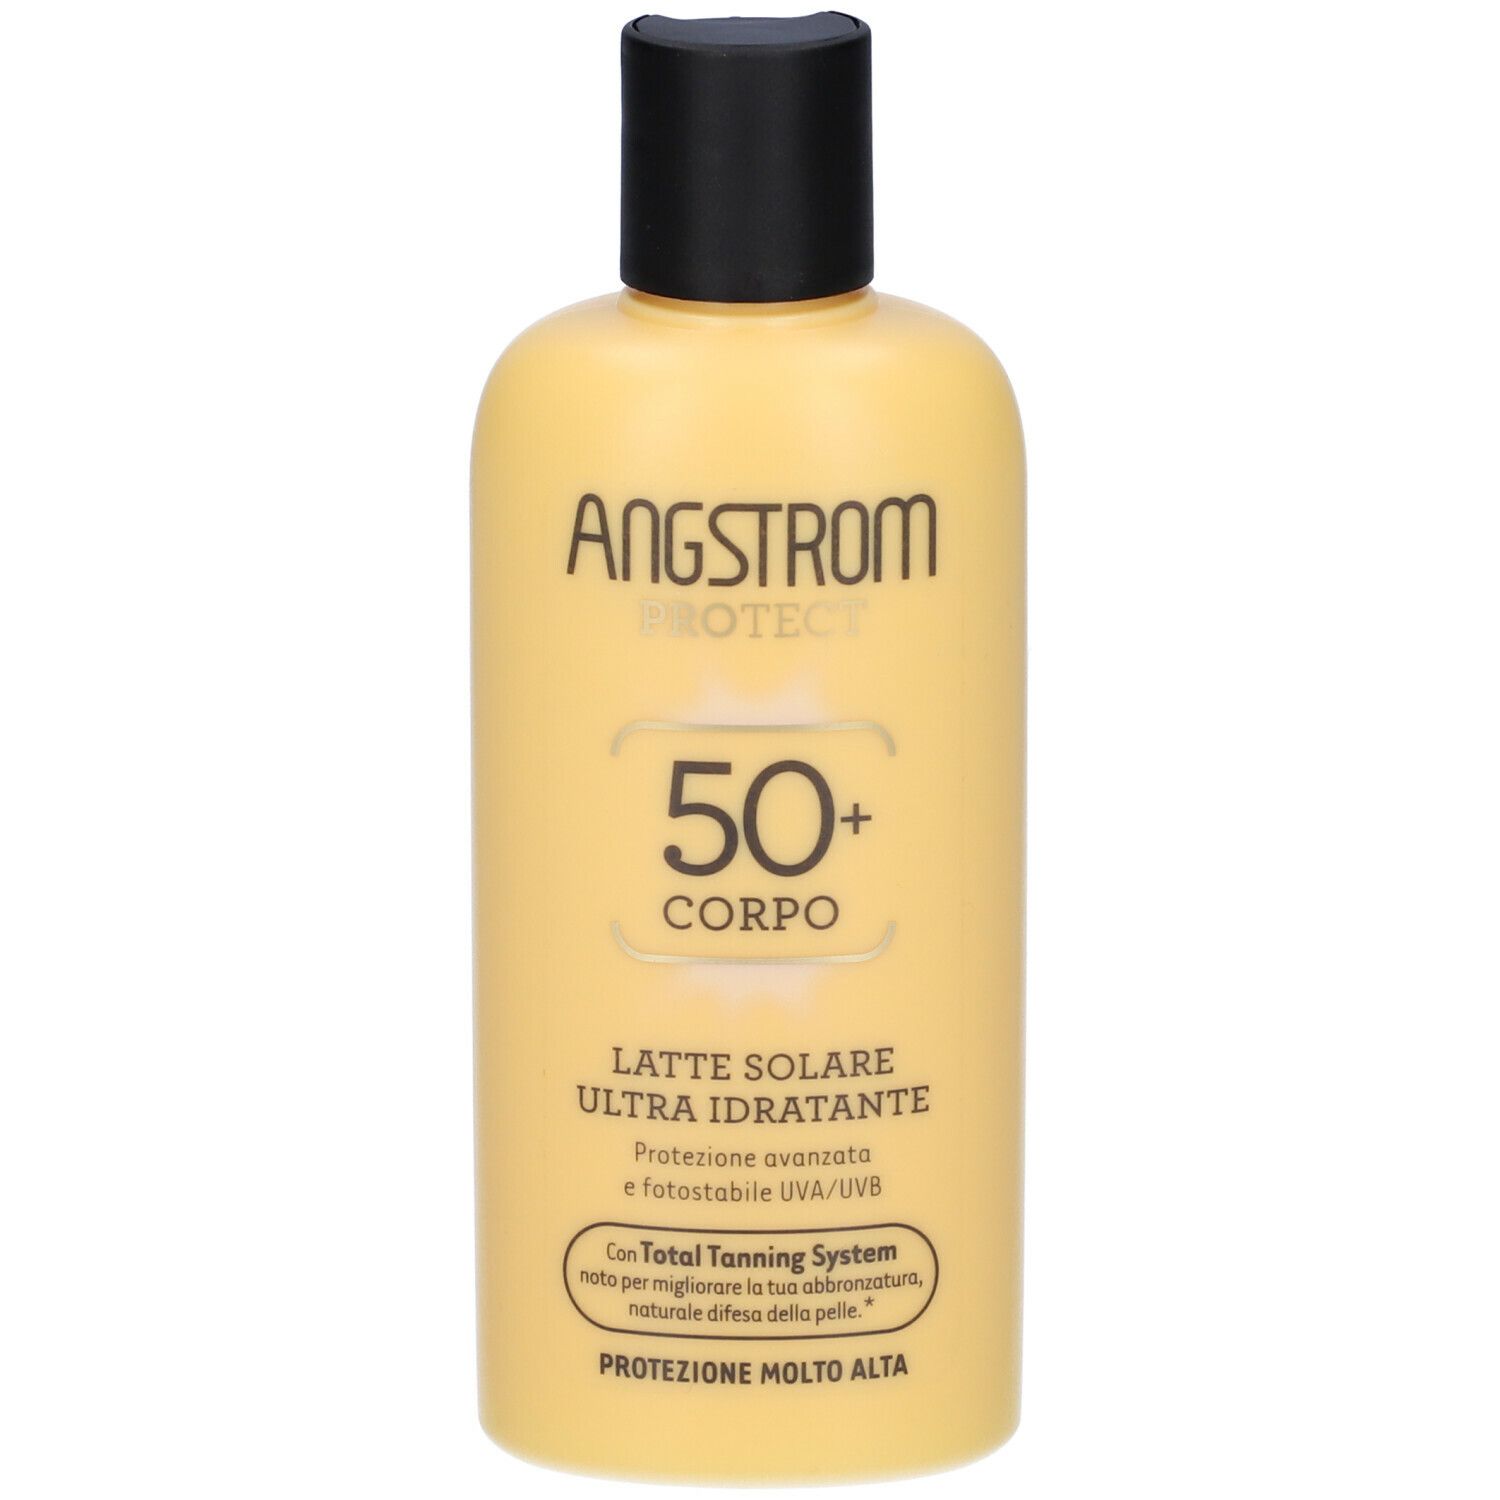 Angstrom Protect Latte Solare SPF 50+